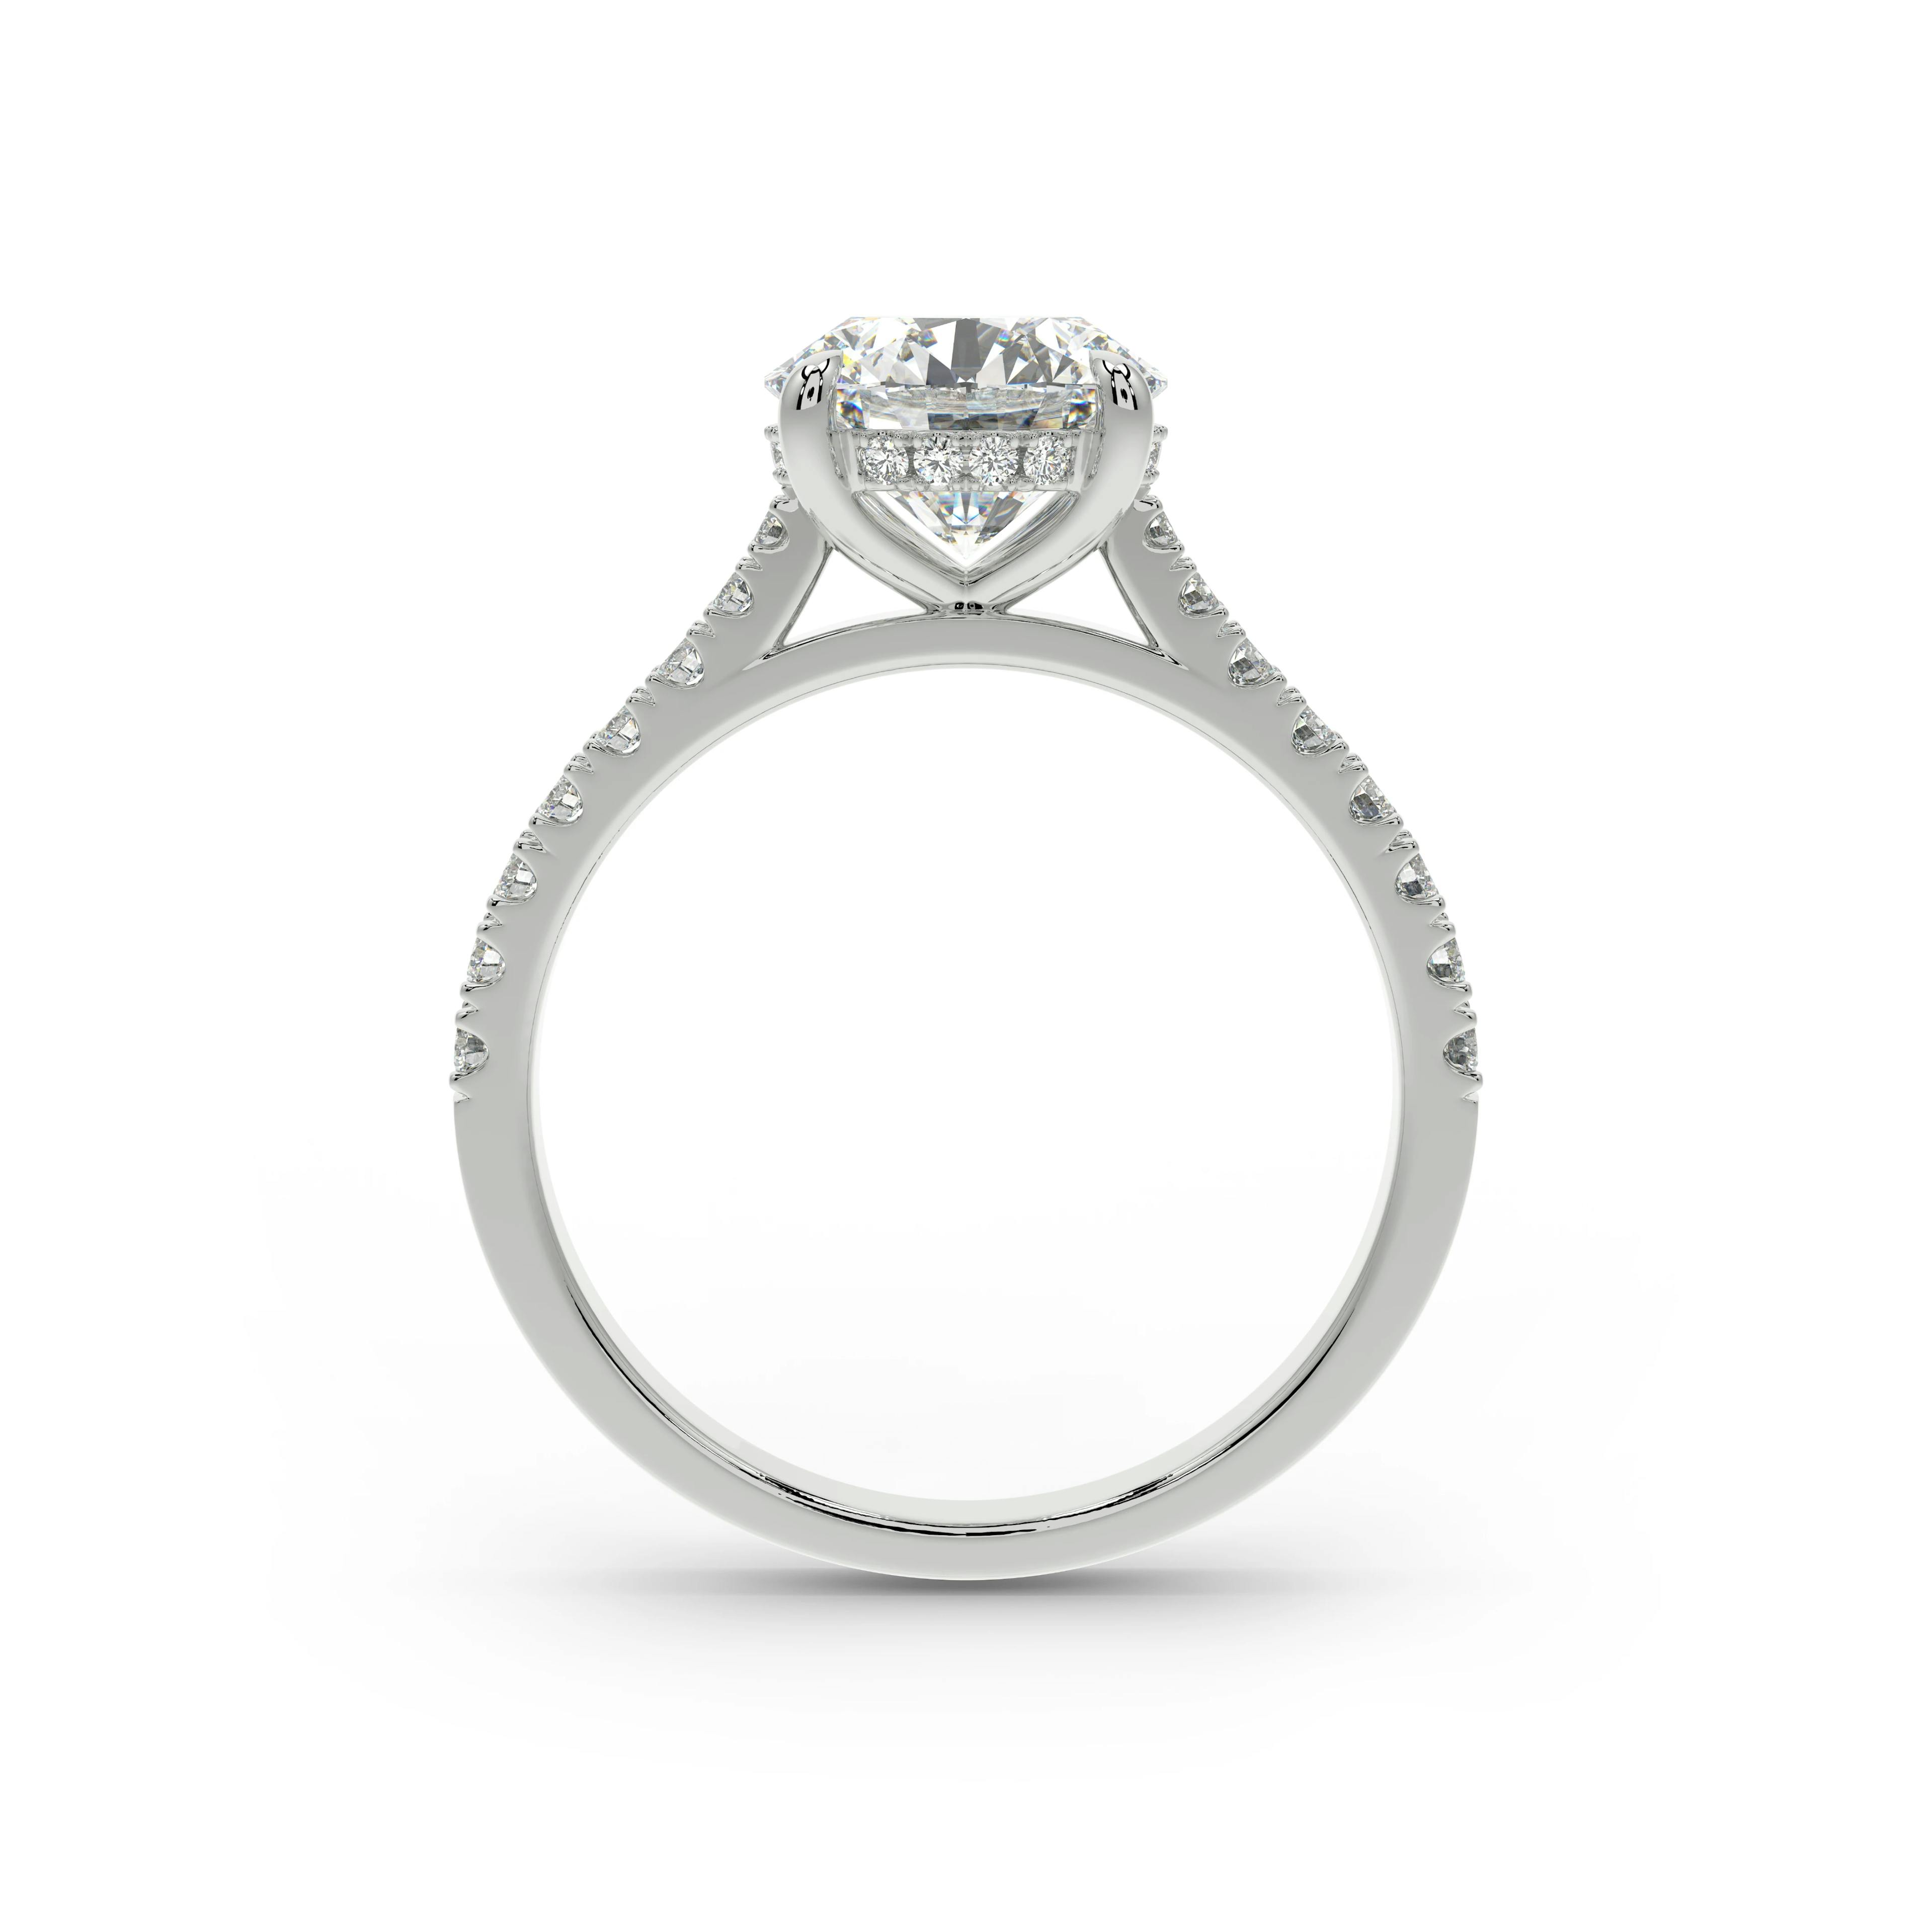 Rendered image of a diamond solitaire ring with a hidden halo and shoulder diamonds in White Gold